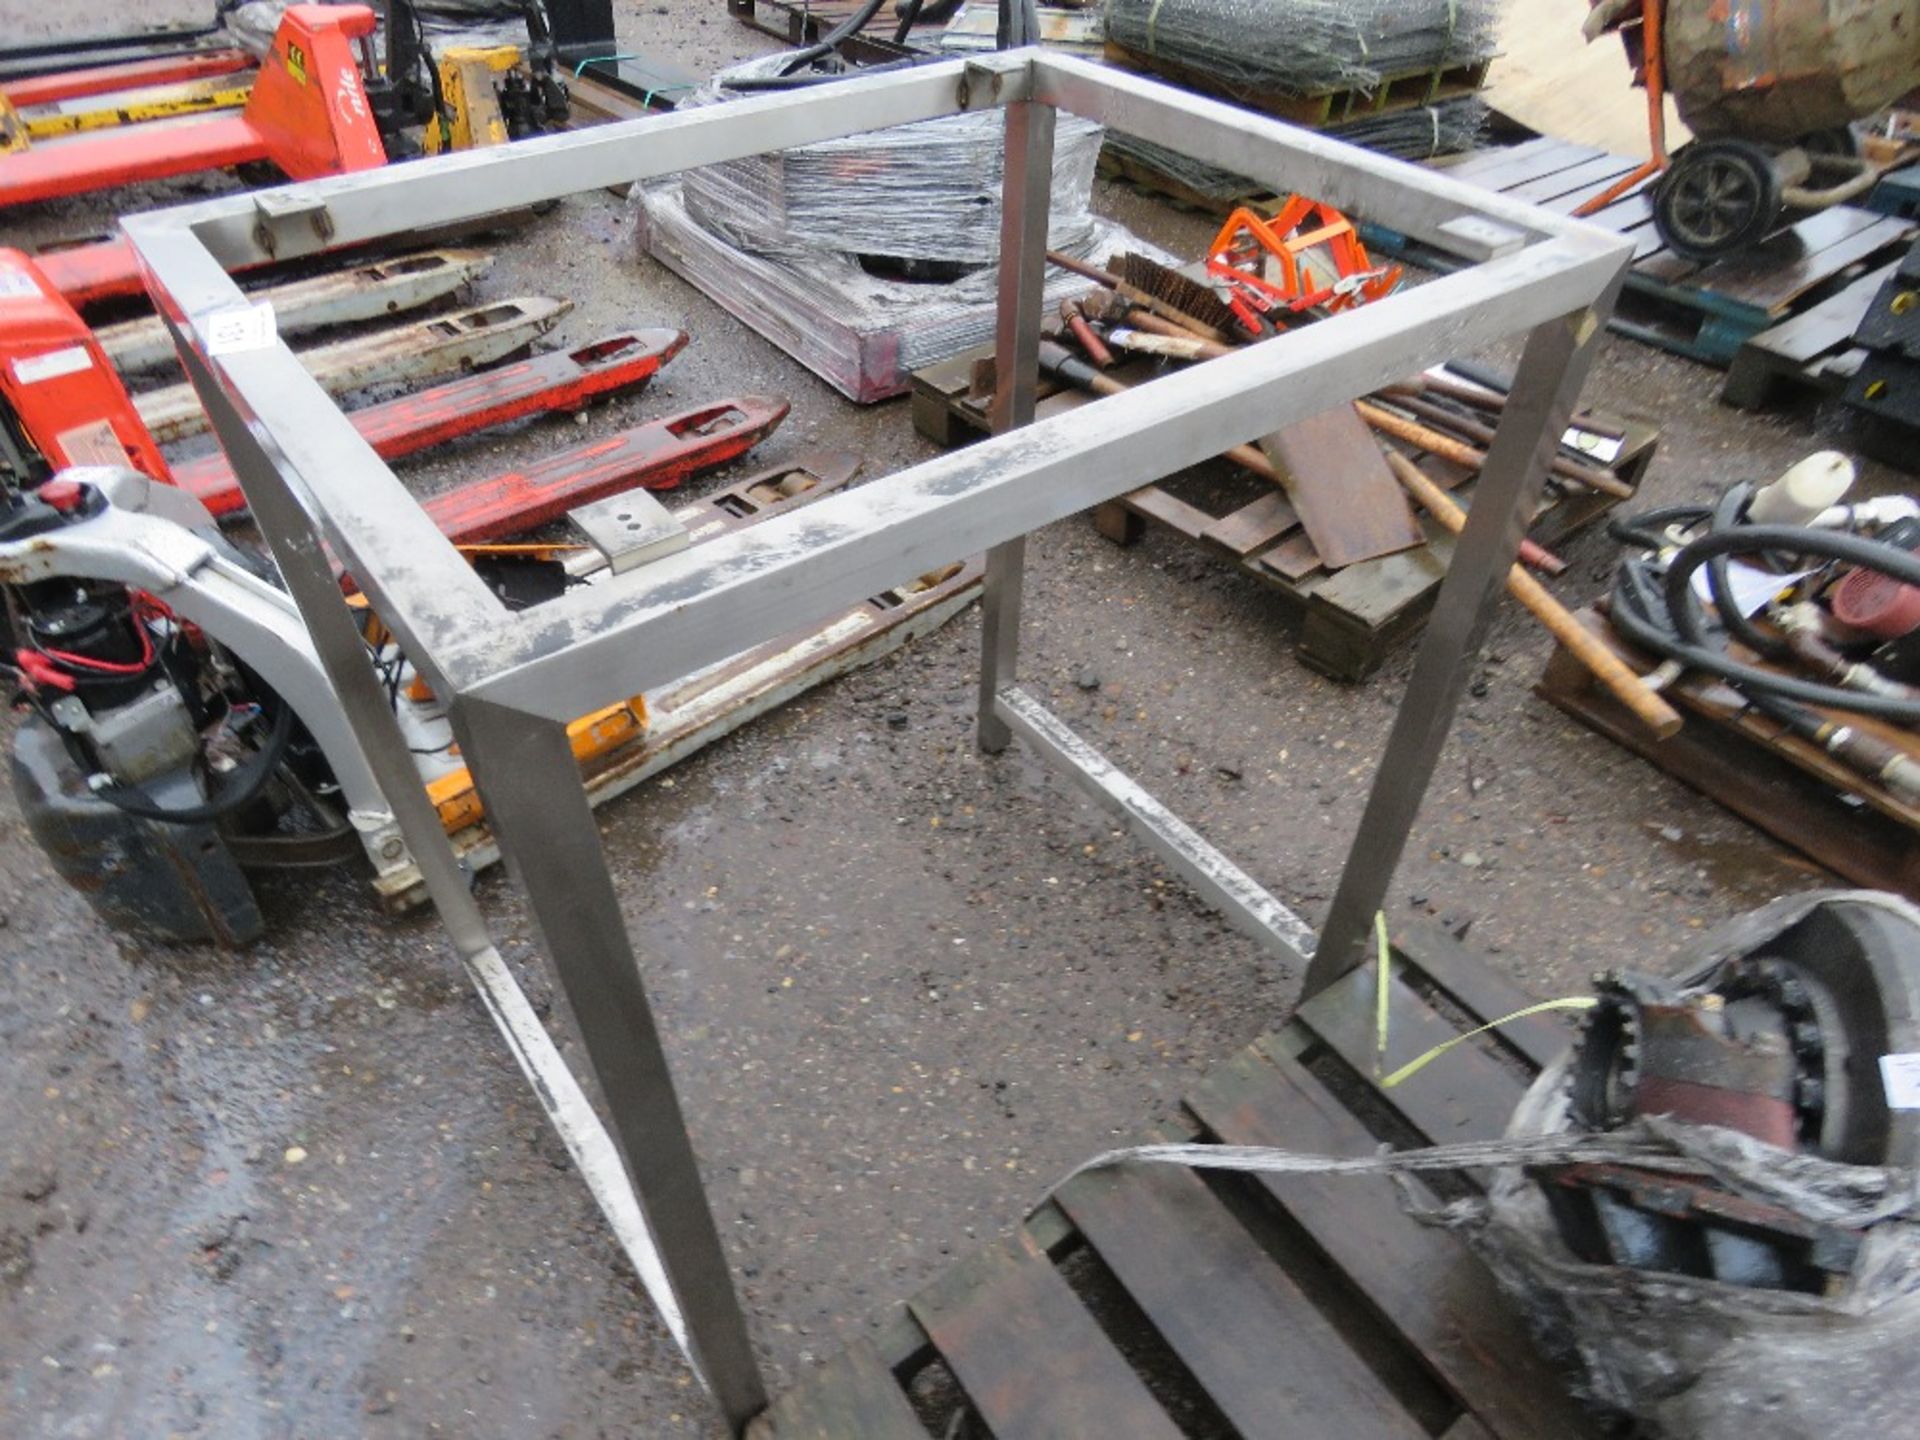 STANLESS STEEL FRAME. SOURCED FROM COMPANY LIQUIDATION. - Image 2 of 2